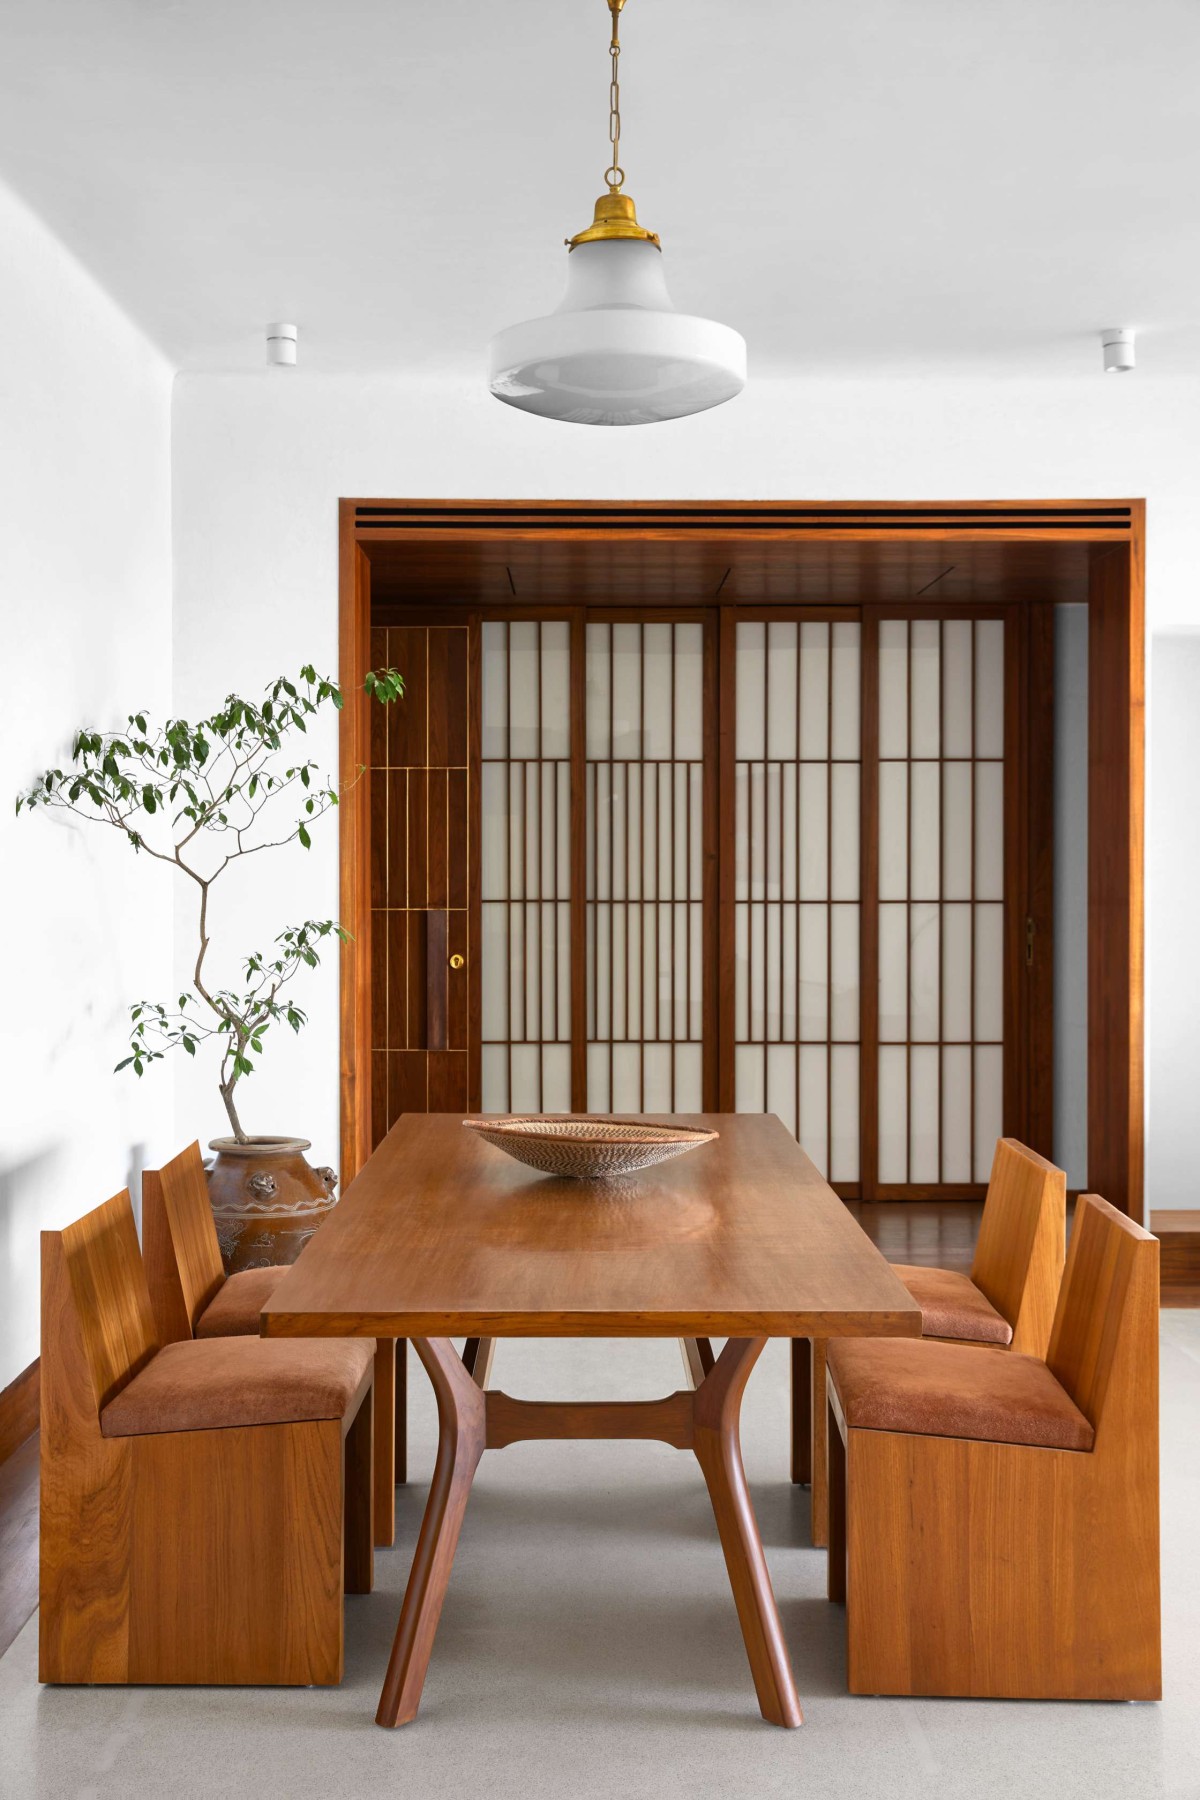 Dining of The Zen Apartment by Atelier Varun Goyal